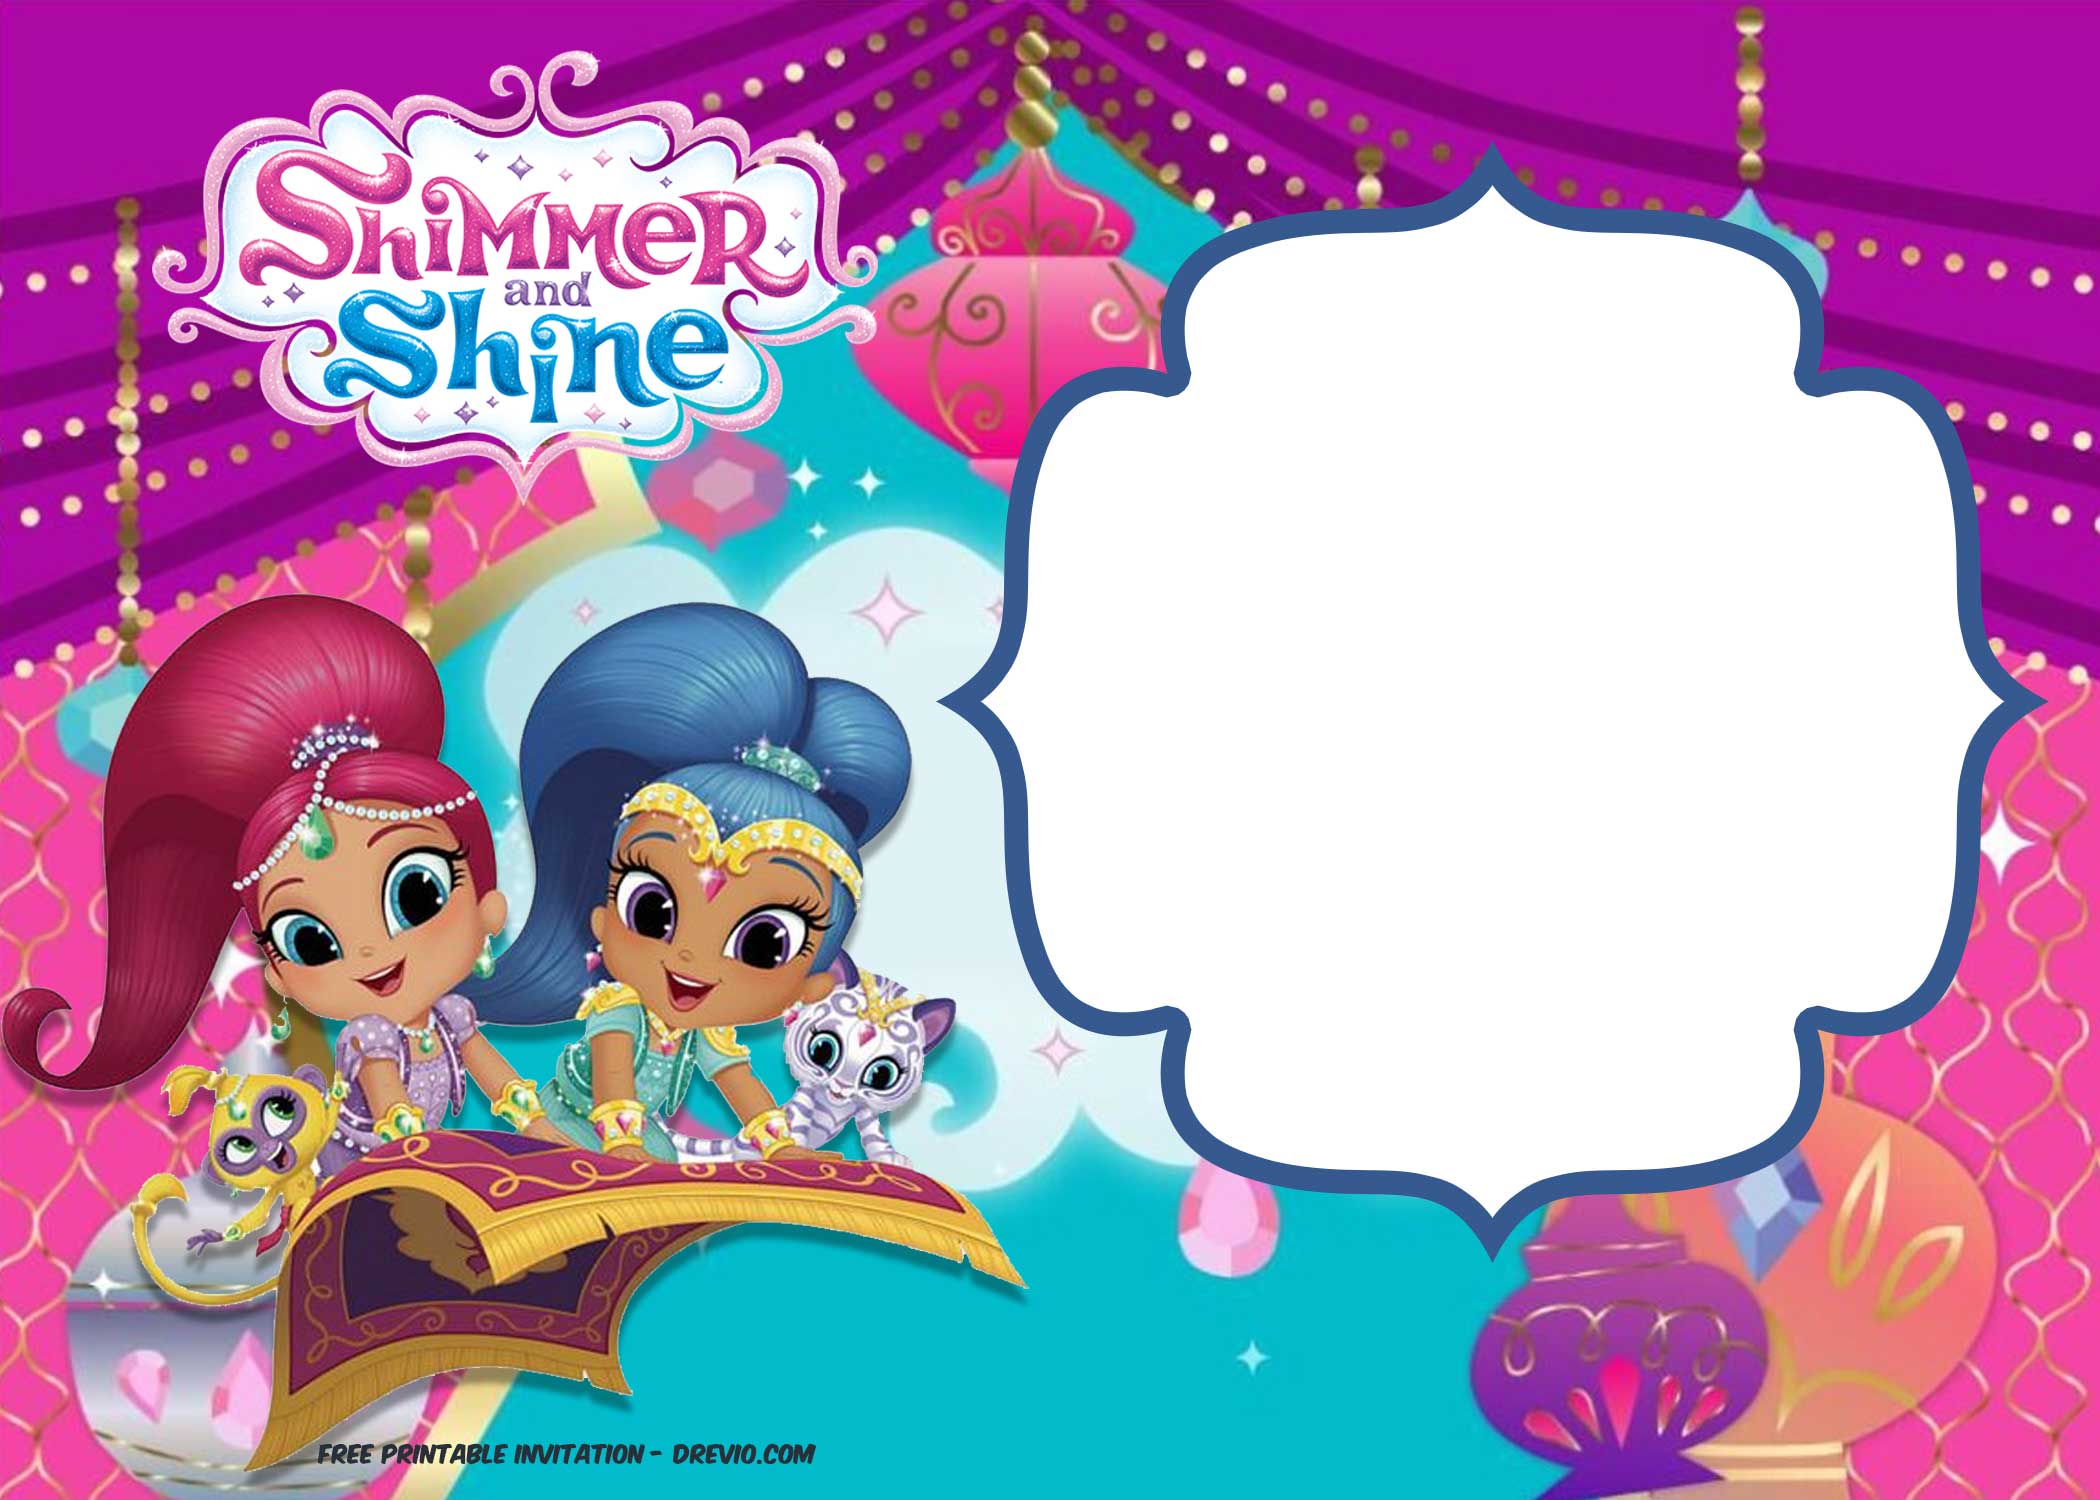 FREE Shimmer and Shine Invitation Template Download Hundreds FREE